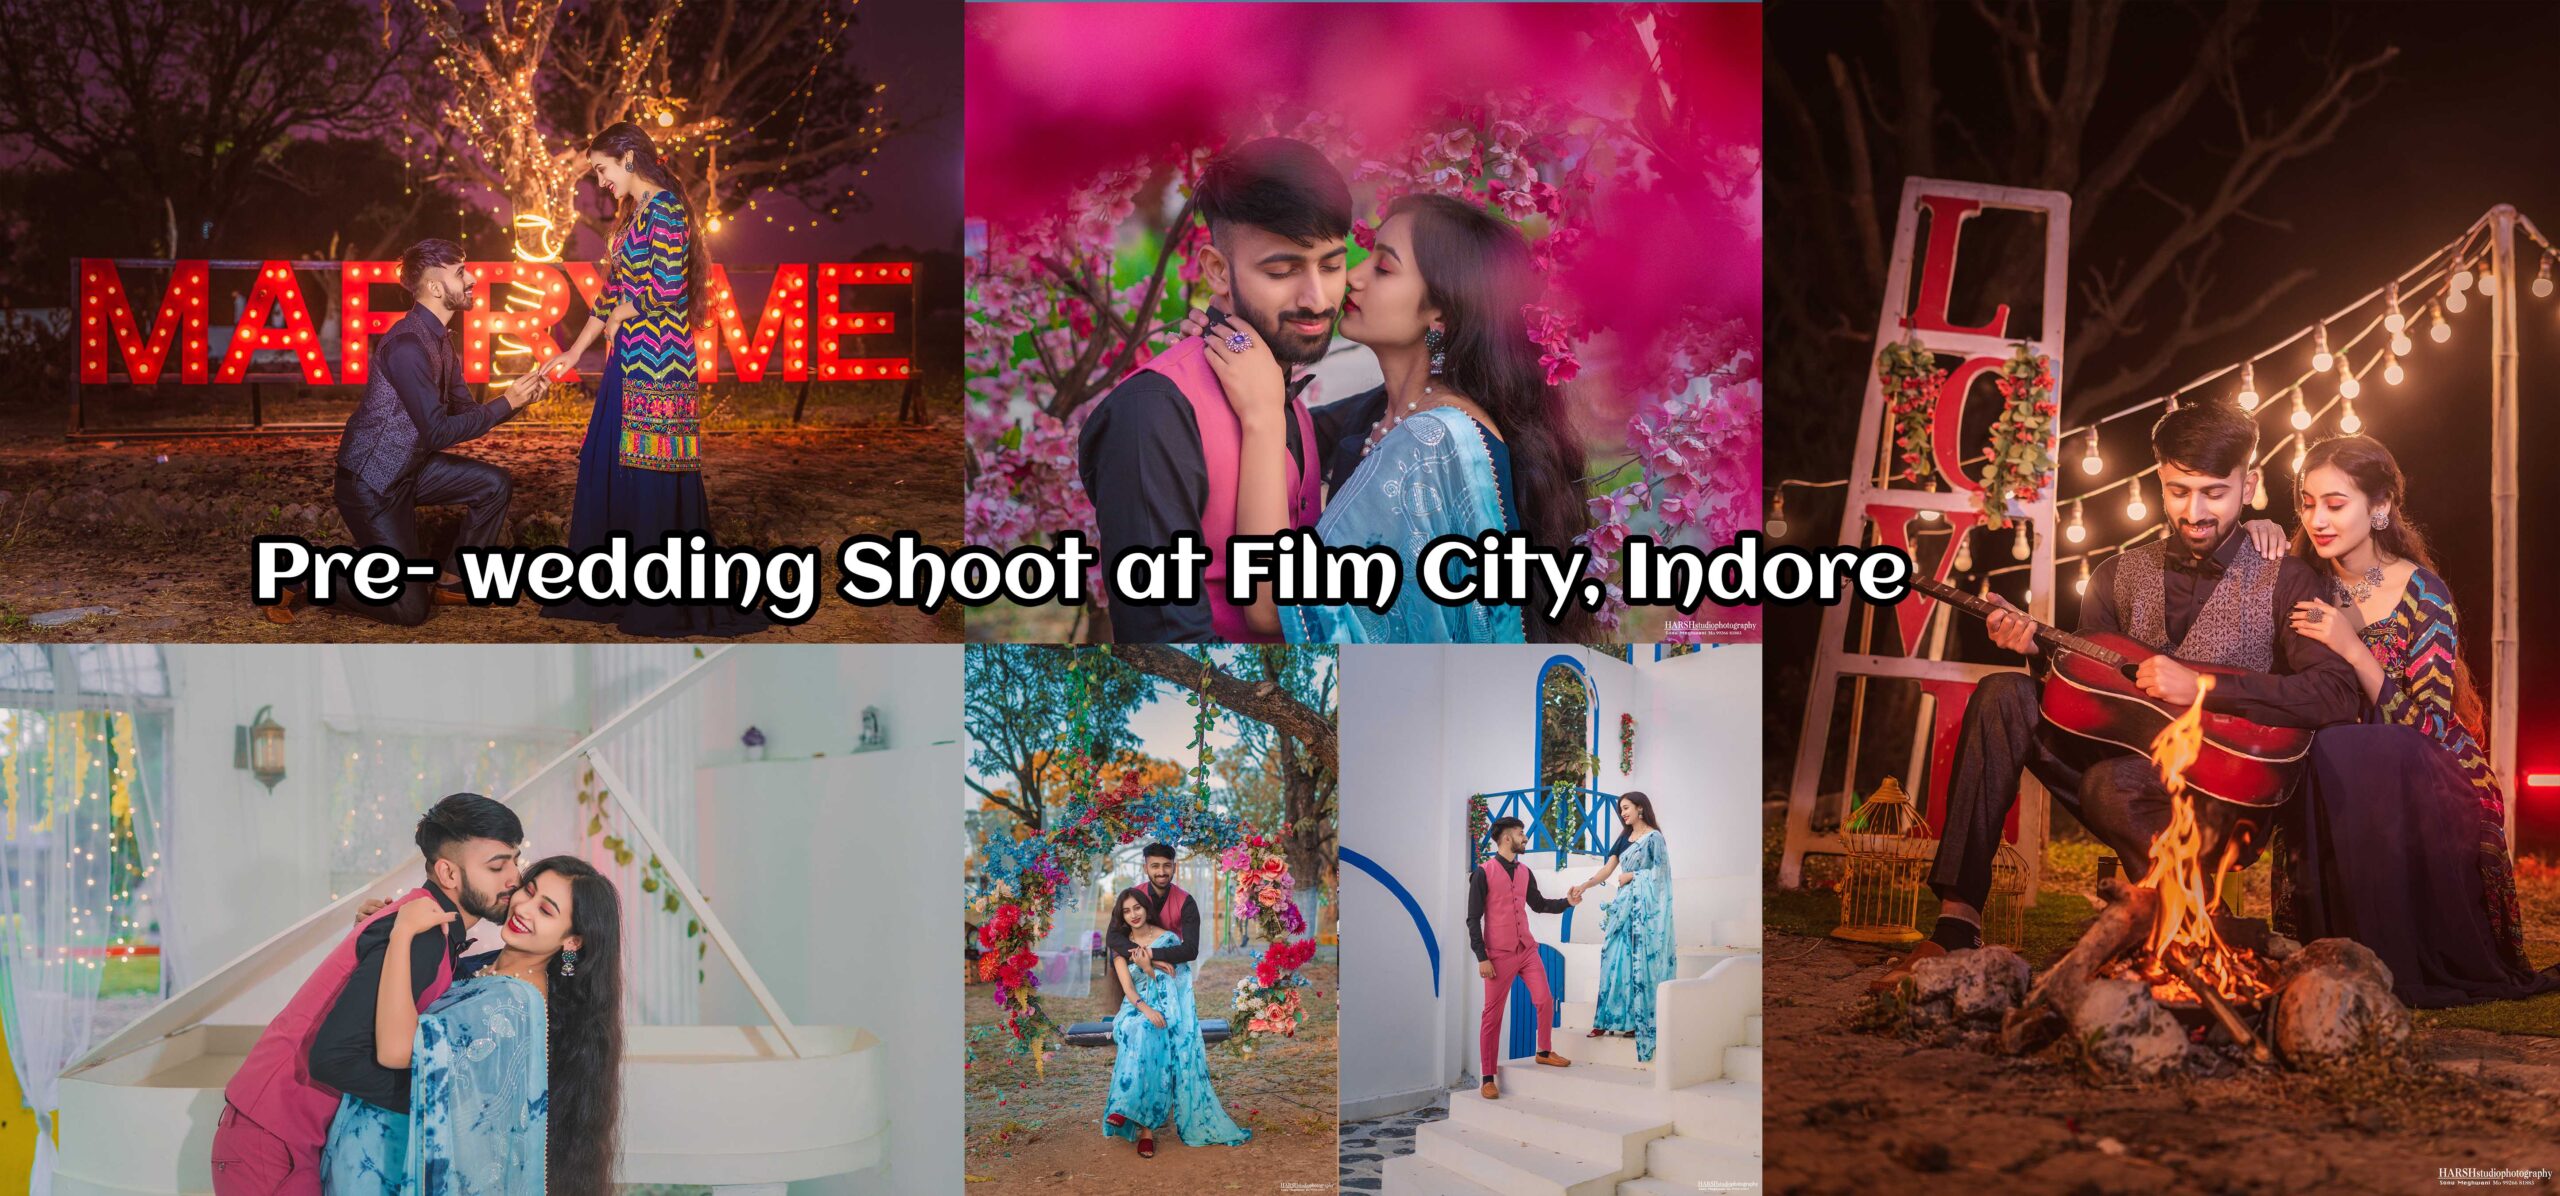 Pre-wedding shoot at Film City, Indore, featuring a happy couple captured by Harsh Studio Photography. The scenic backdrop enhances the couple's candid and joyful moments.